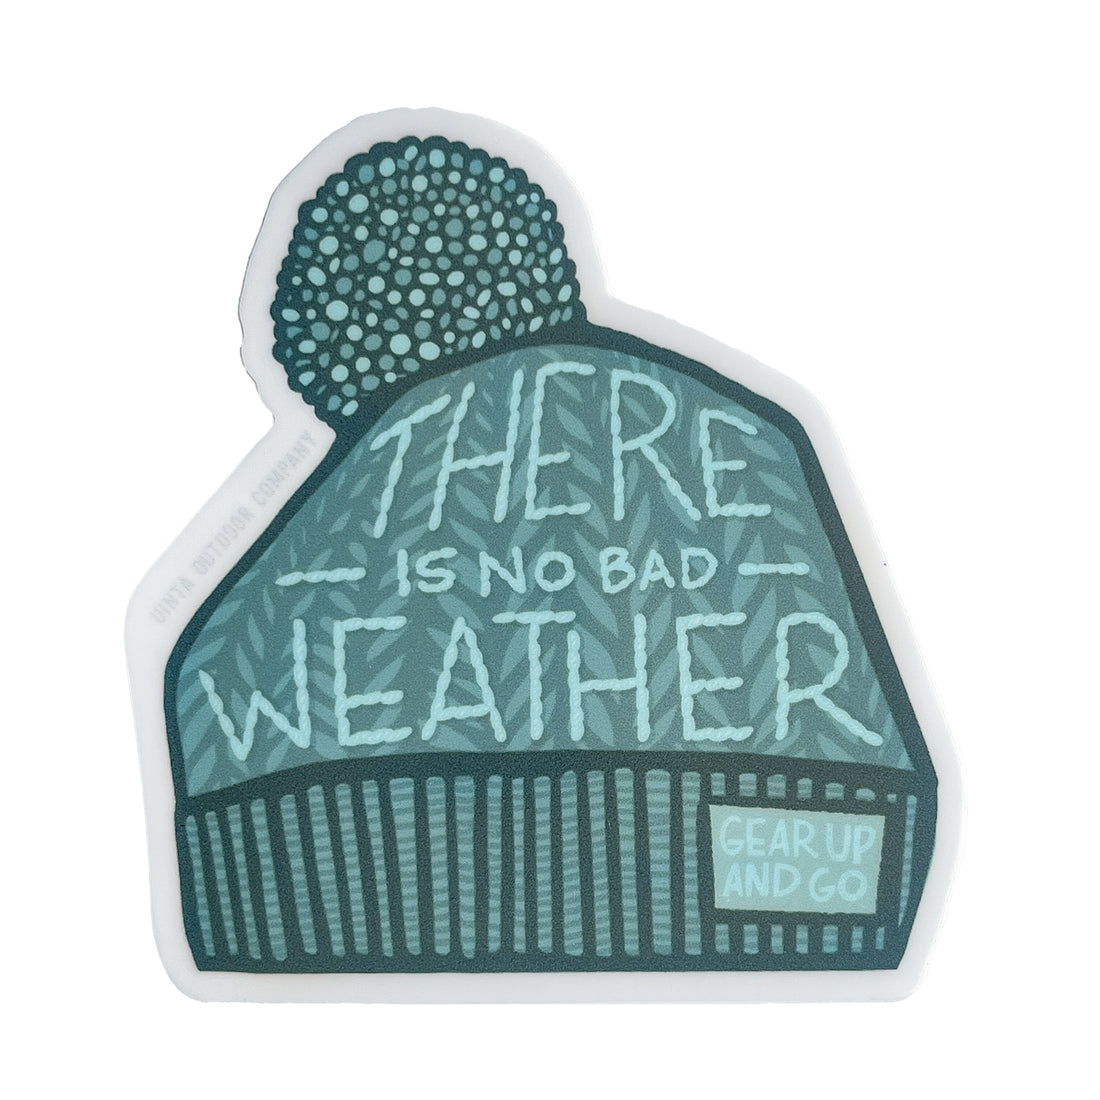 Light blue snow hat shaped sticker with: There is No Bad Weather: Gear up and Go lettering illustrated on the hat.